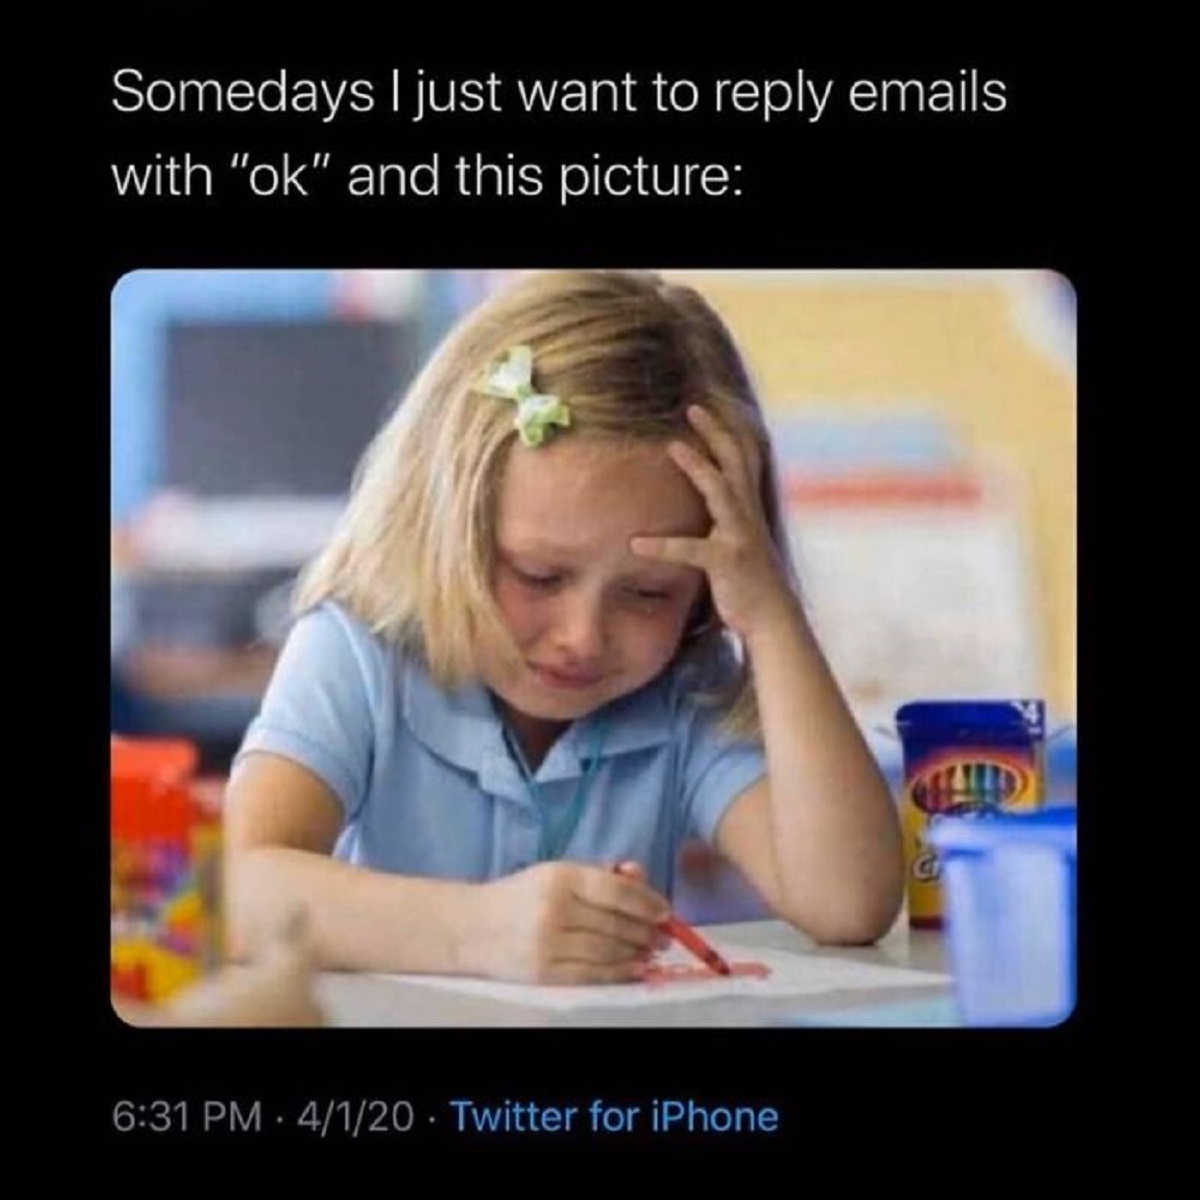 learning - Somedays I just want to emails with "ok" and this picture 4120 Twitter for iPhone